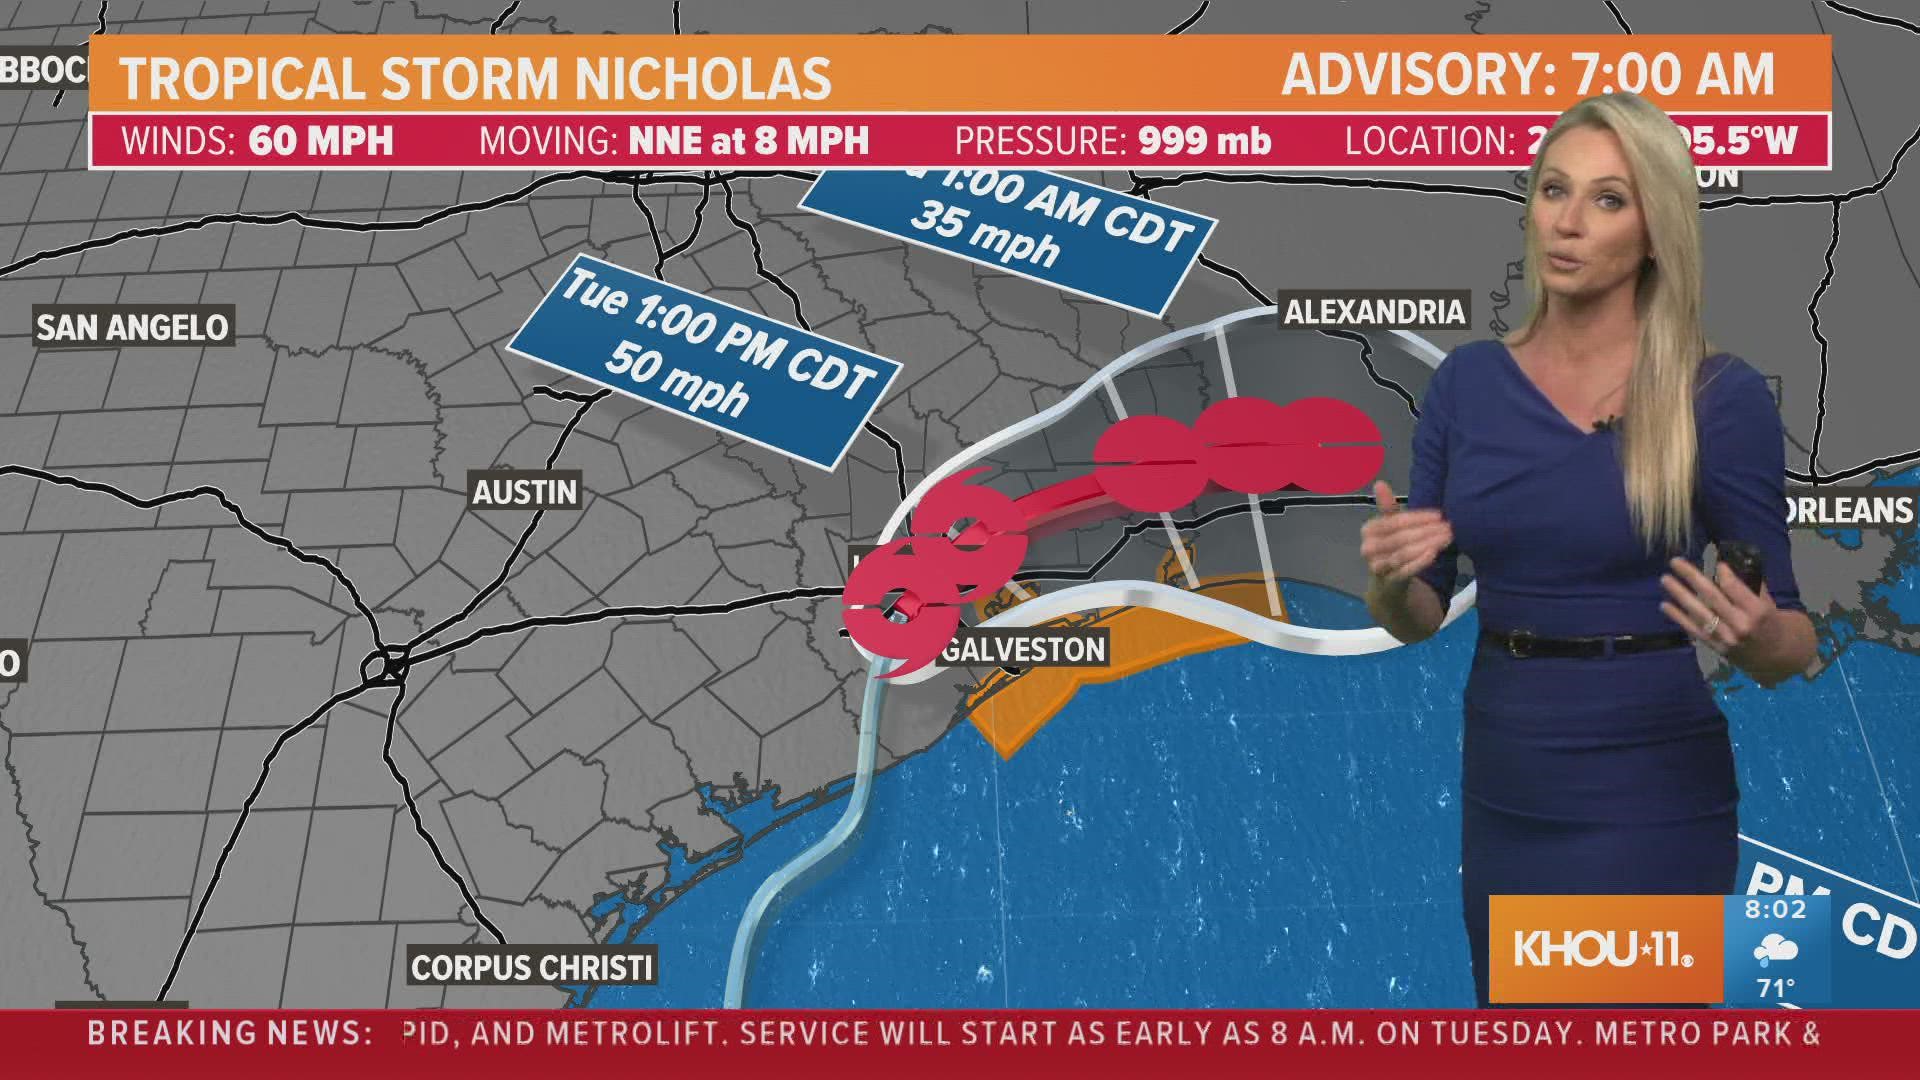 Tropical Storm Nicholas is anticipated to ease up significantly by noon.